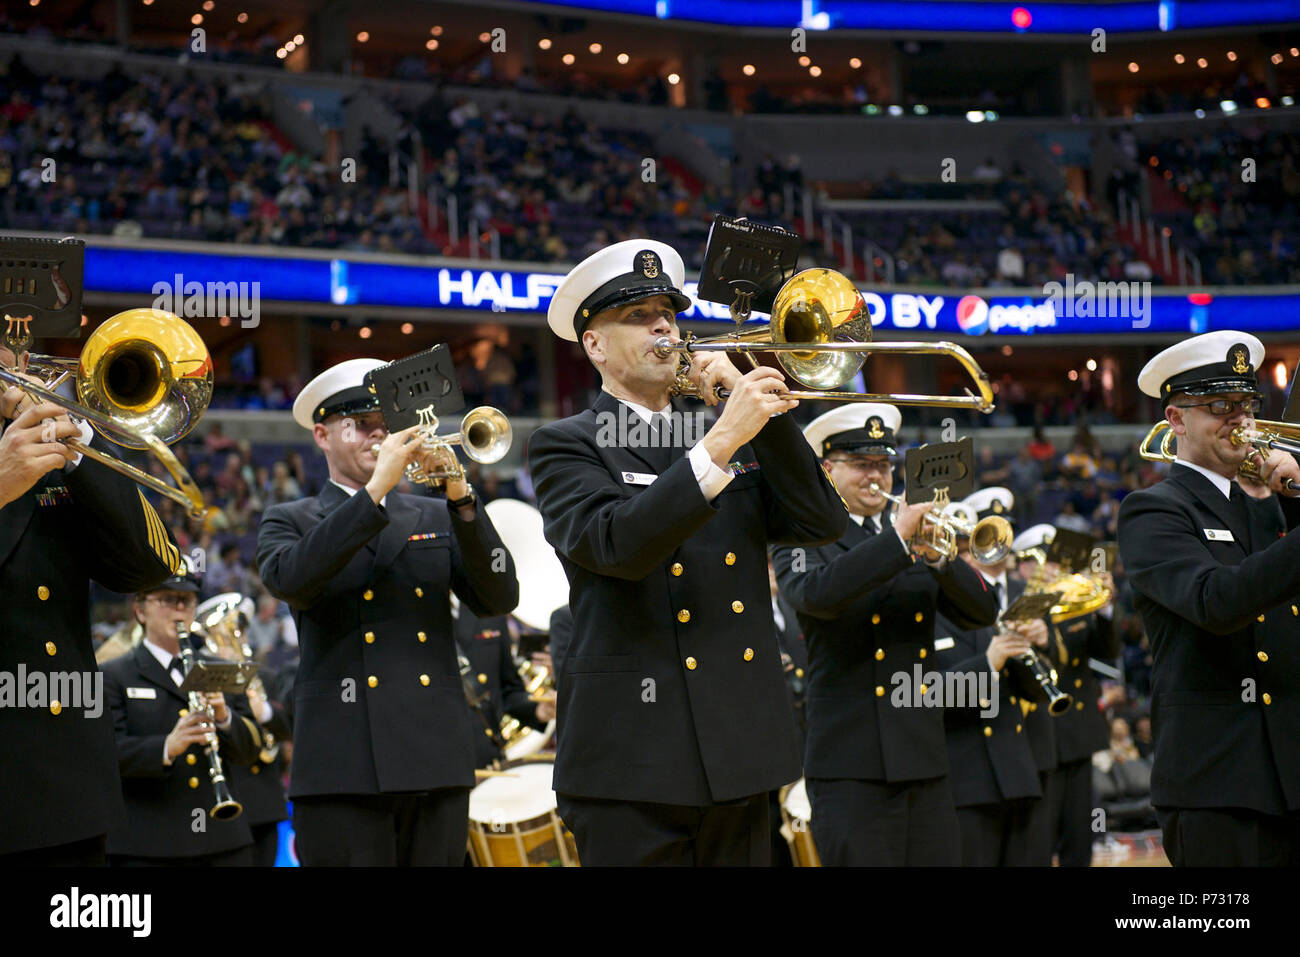 WASHINGTON (March 28, 2014) The U.S. Navy Ceremonial Band performs at halftime during a basketball game between the Washington Wizards and the Indiana Pacers at the Verizon Center in Washington. The Navy Band performance was part of the team’s Military Appreciation Night. Stock Photo